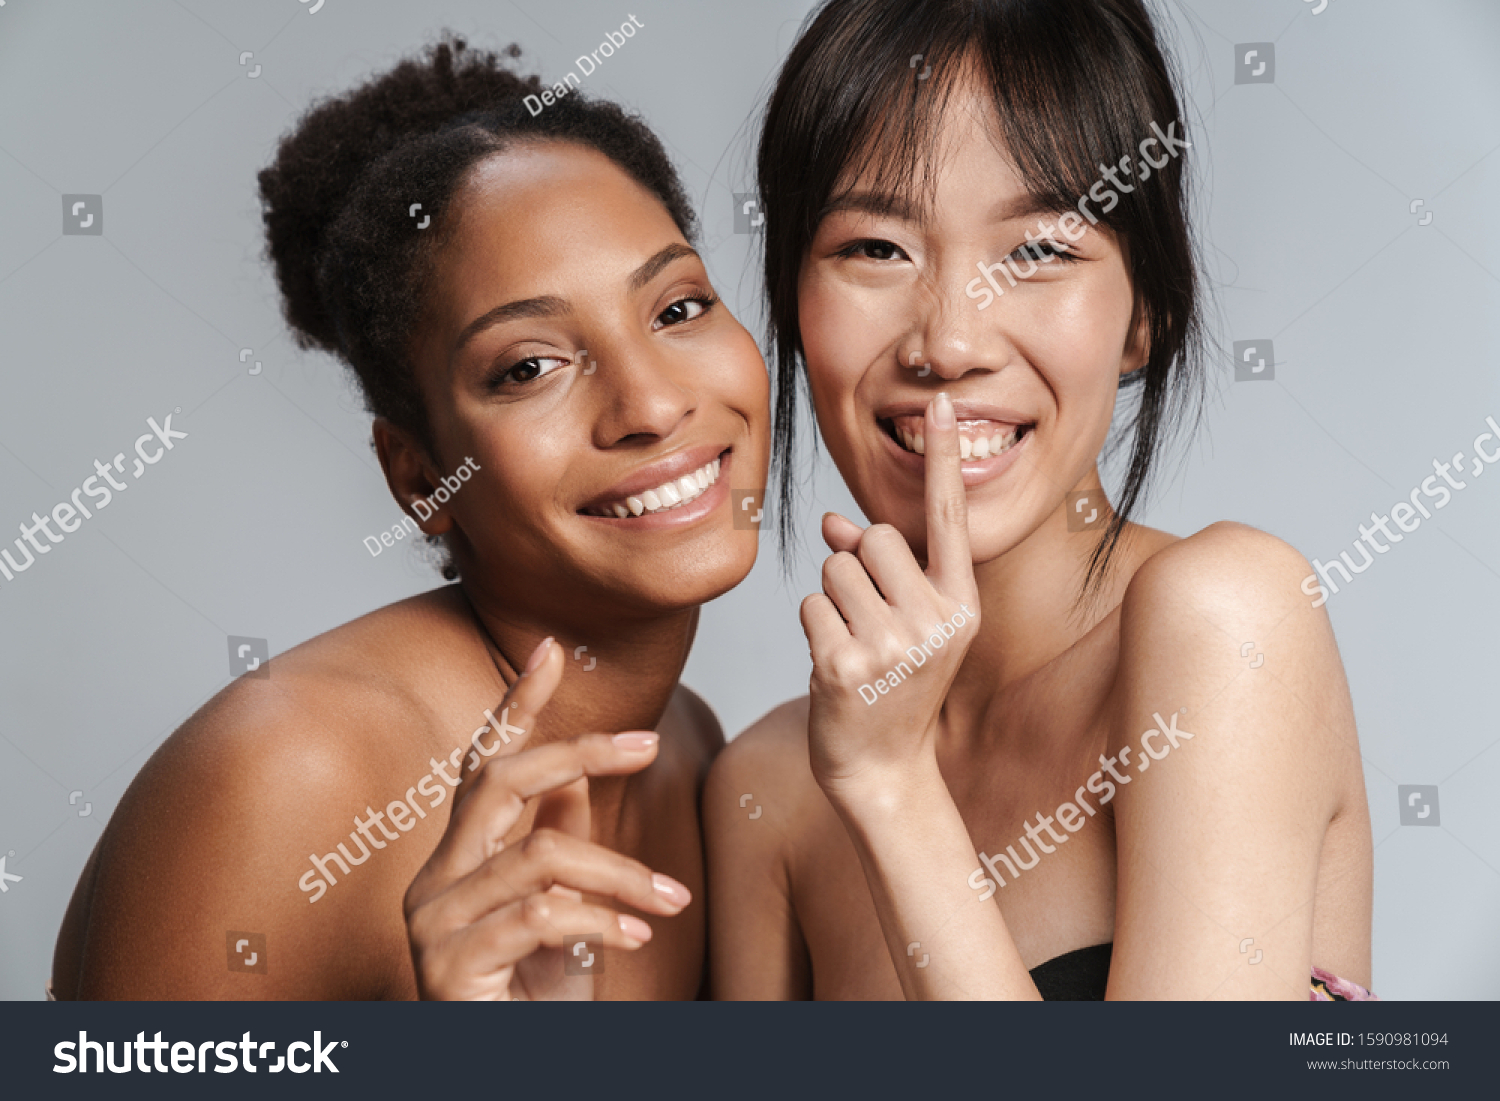 Portrait of two multinational half-naked women making silence gesture and smiling isolated over grey background #1590981094